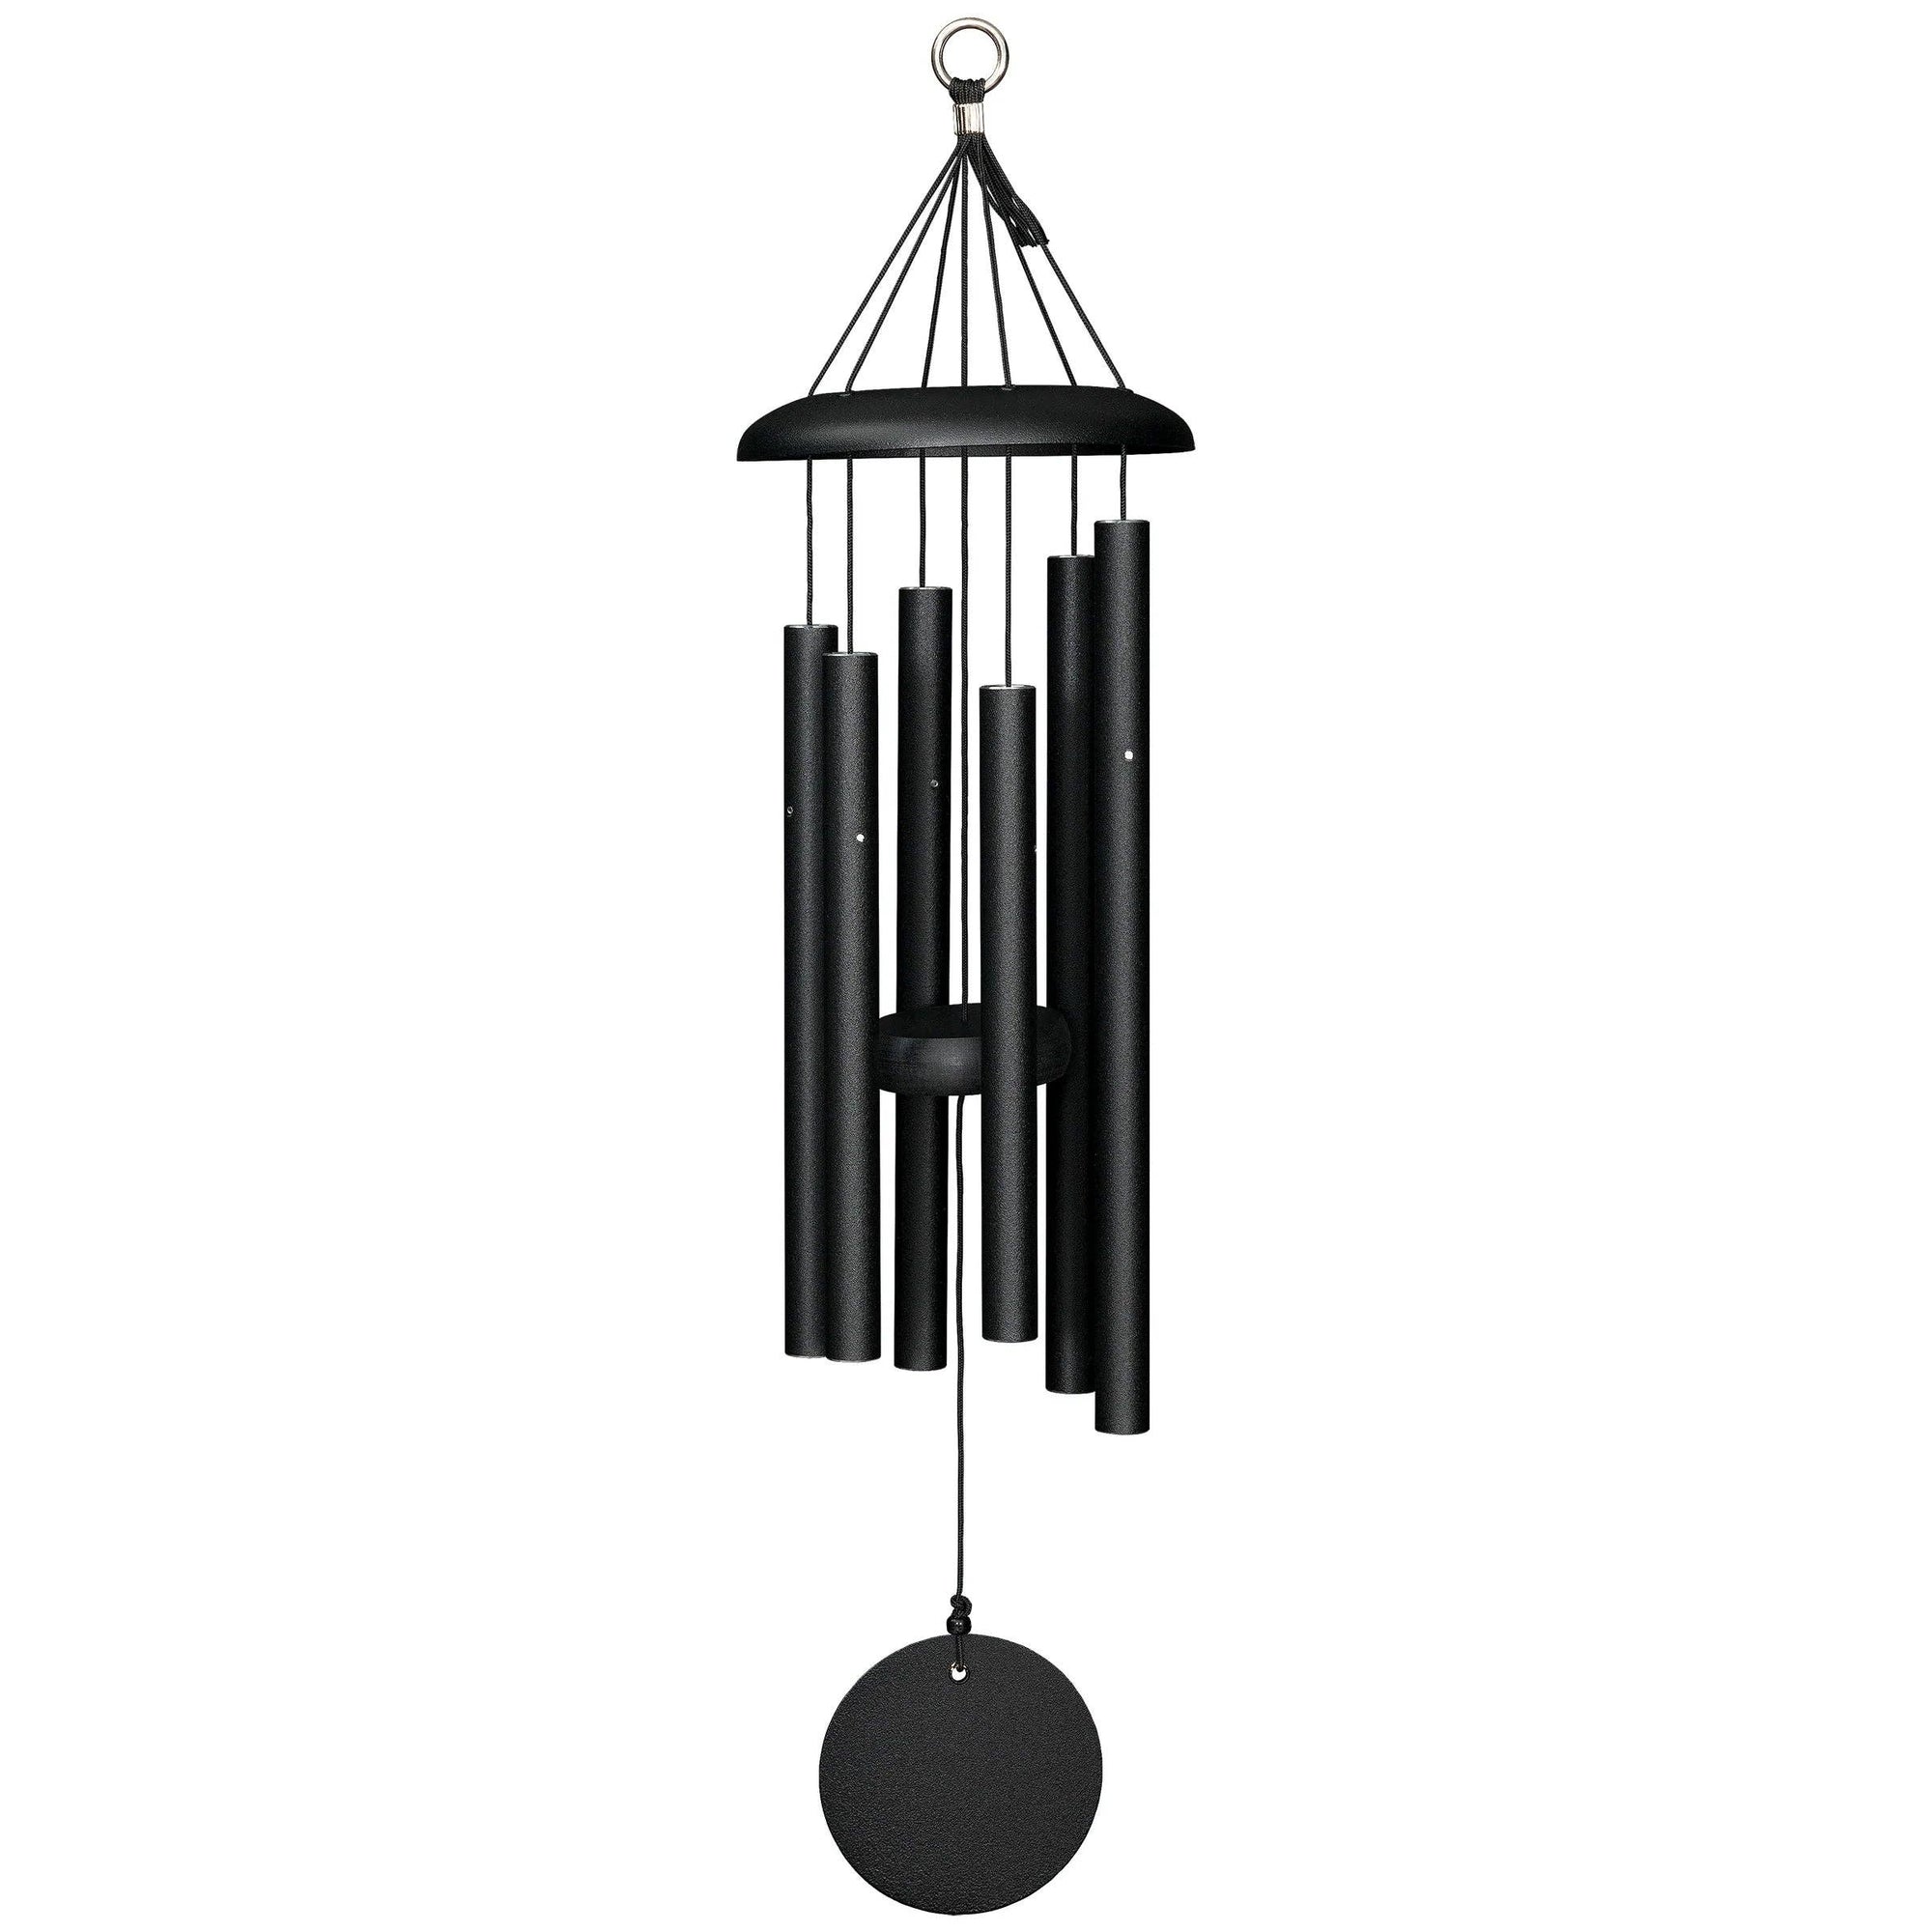 A compact size 27" Windchime Corinthian Bells®, perfect for budget-friendly and stylish decor.